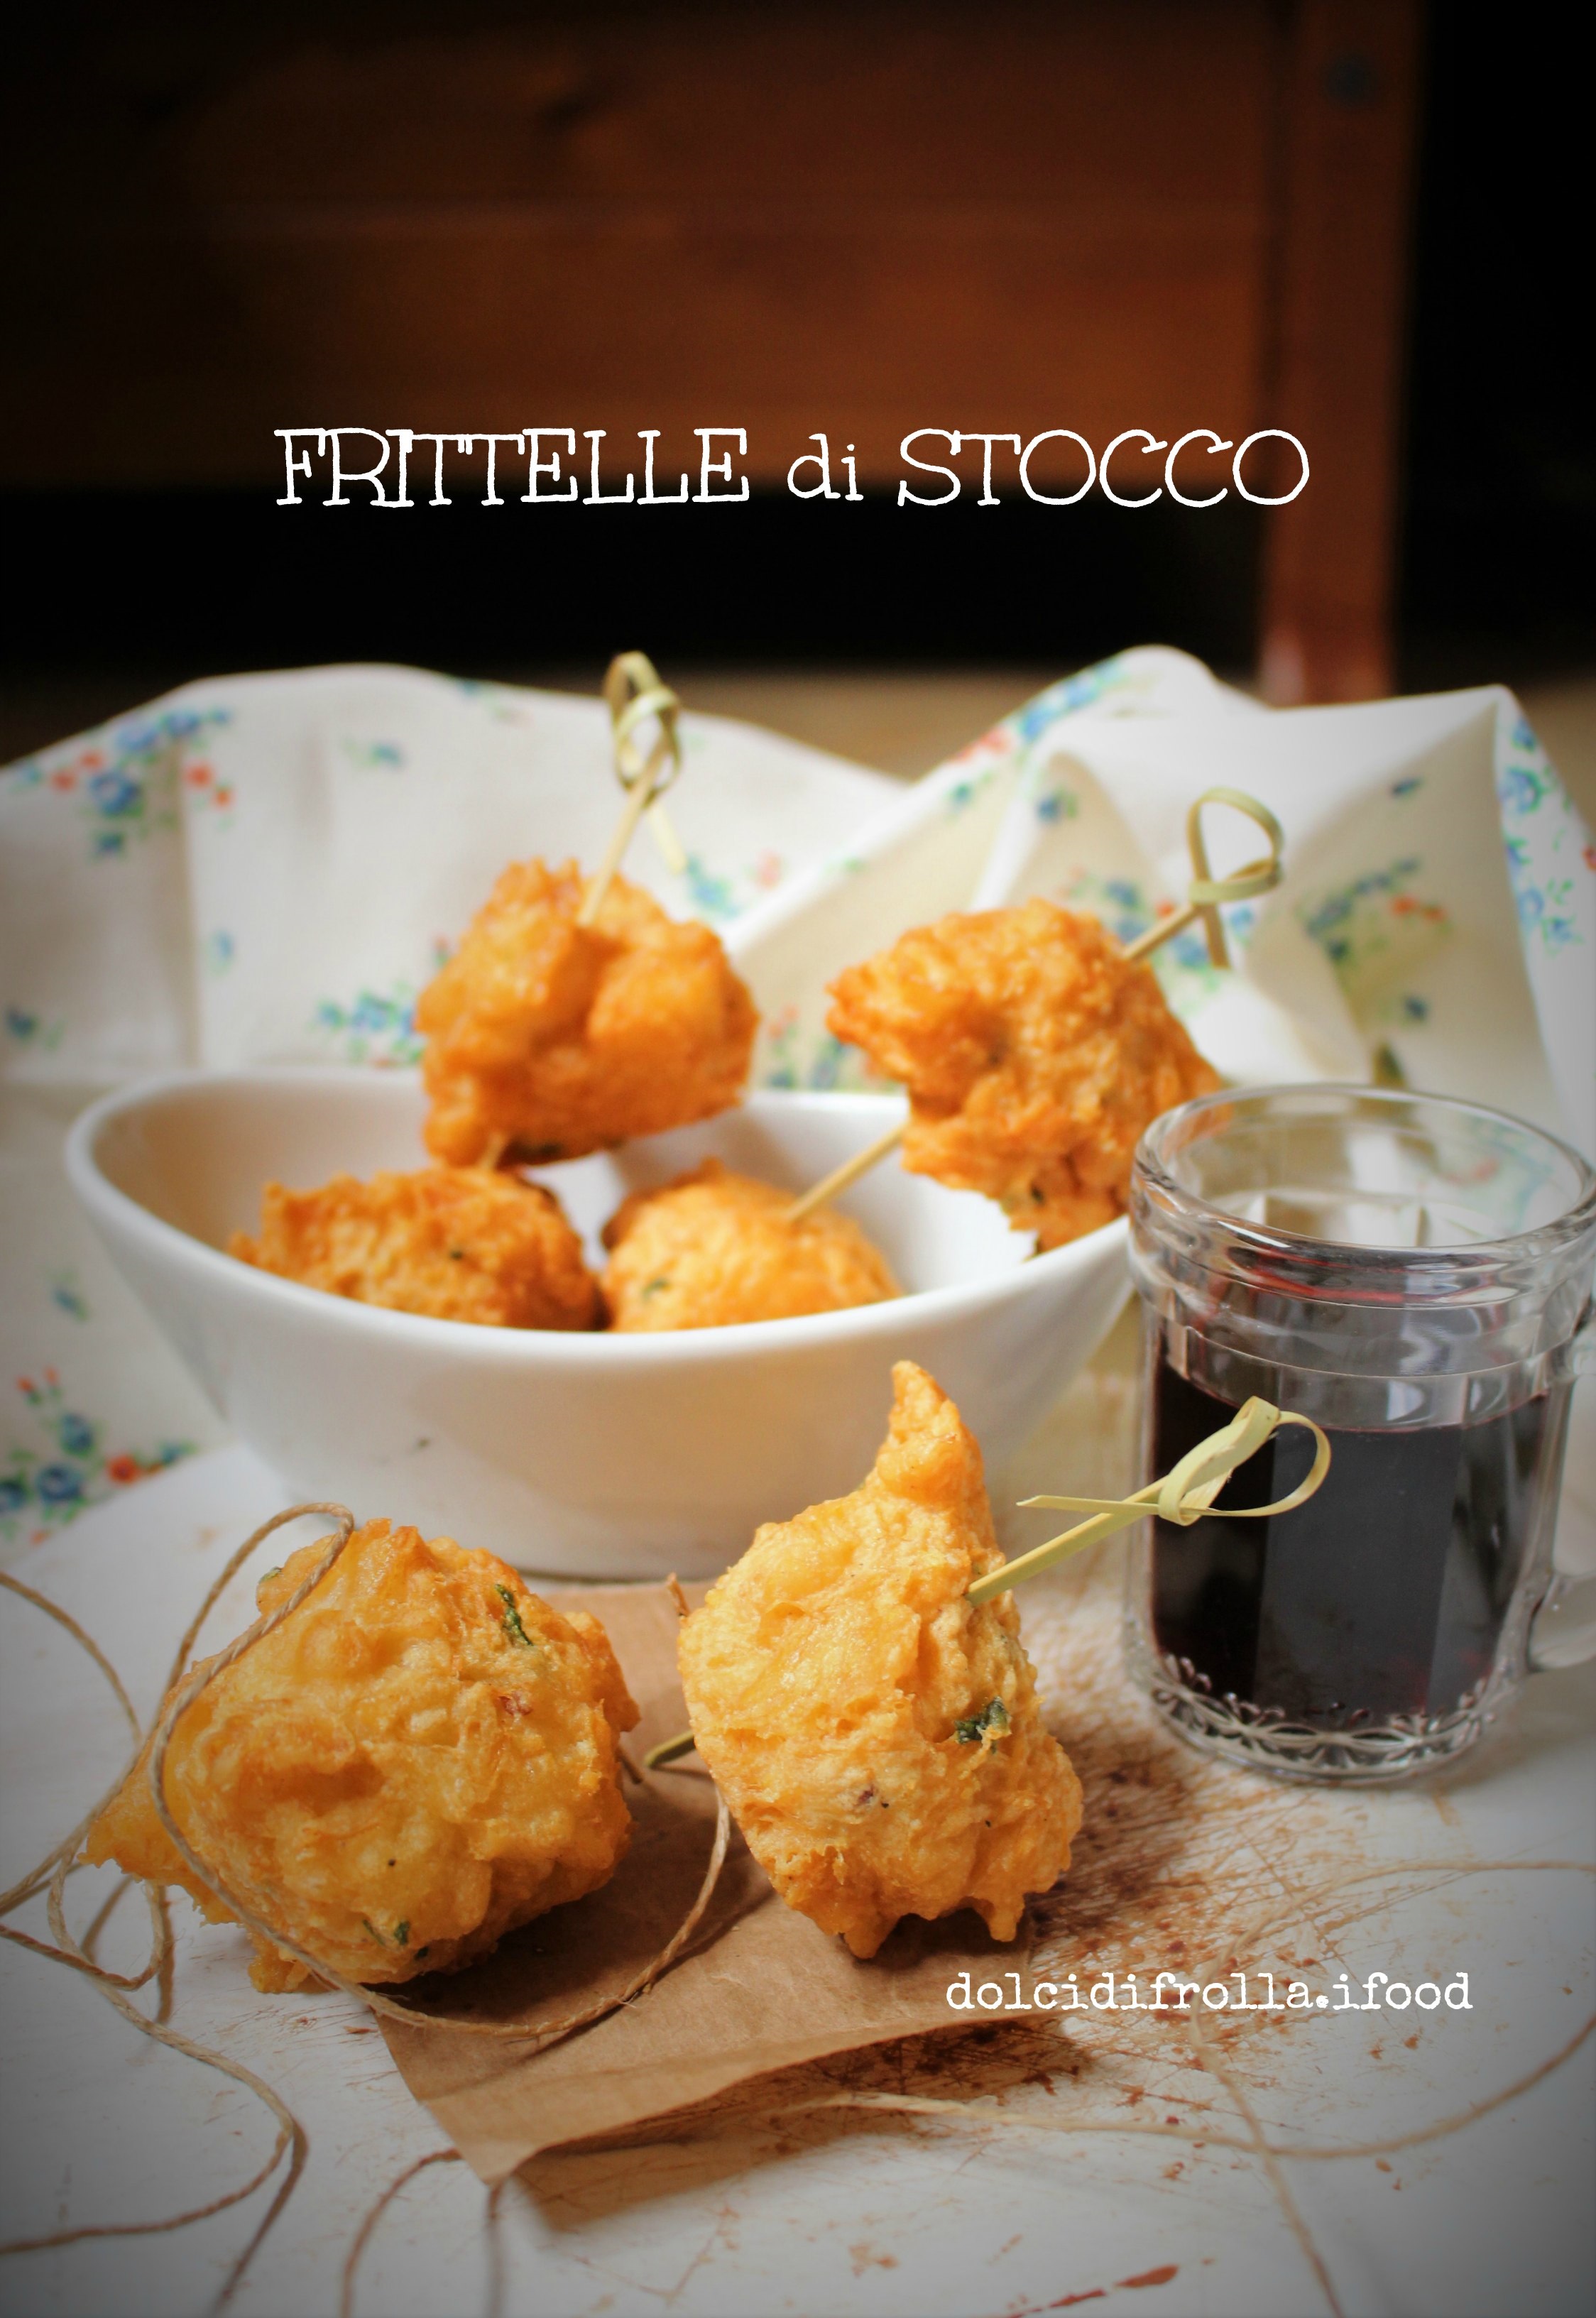 FRITTELLE DI STOCCO